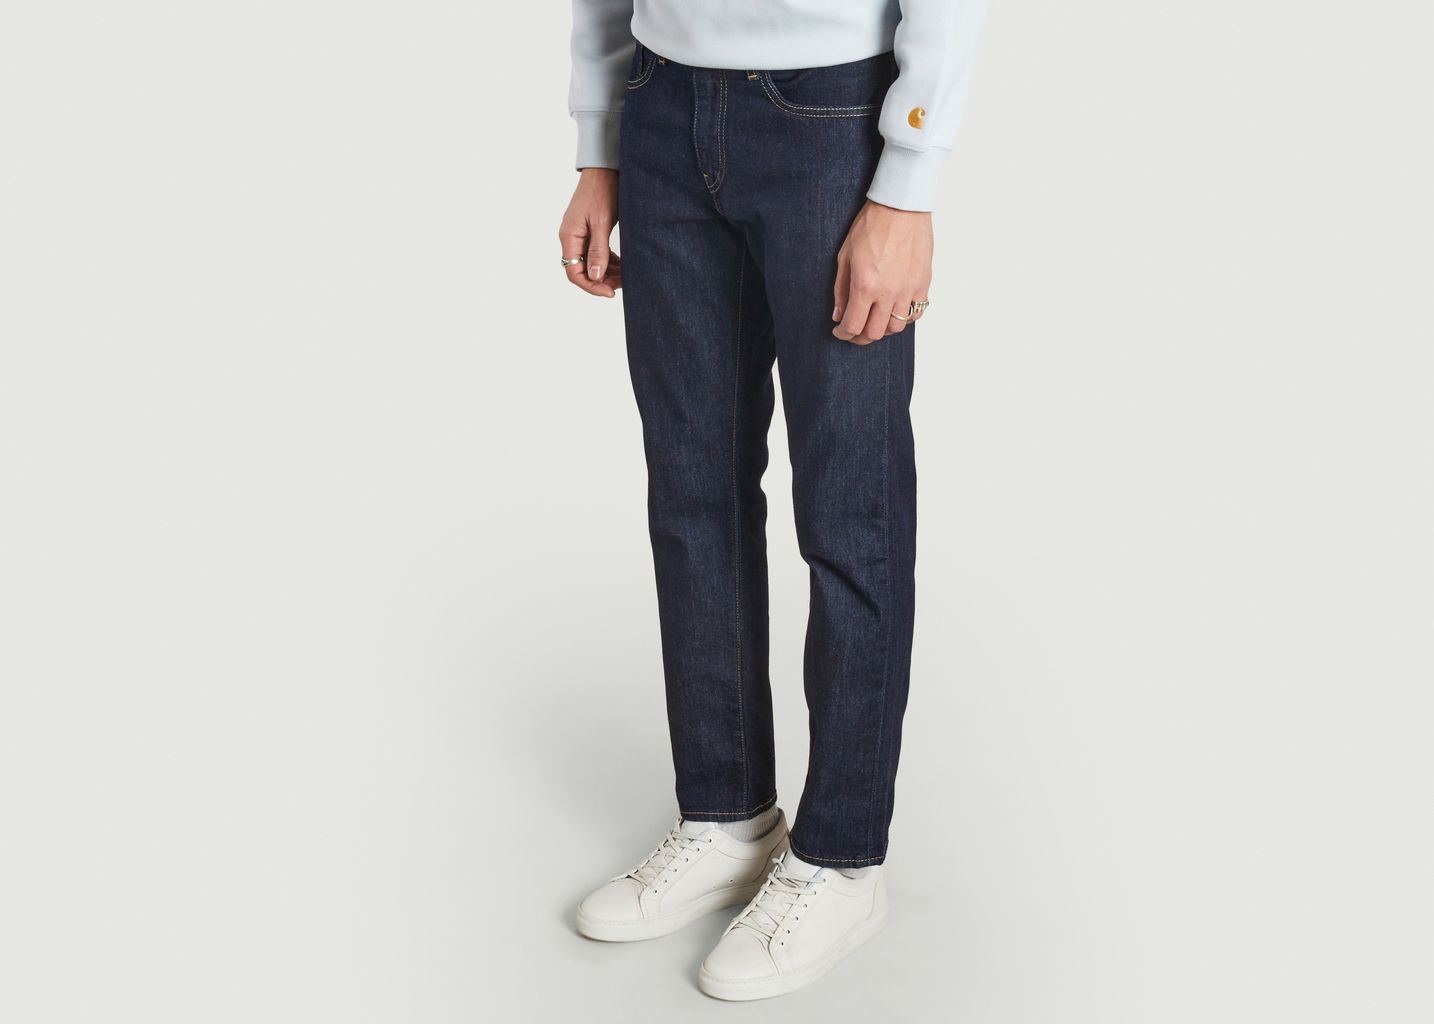 502™ Taper Jeans  - Levi's Red Tab